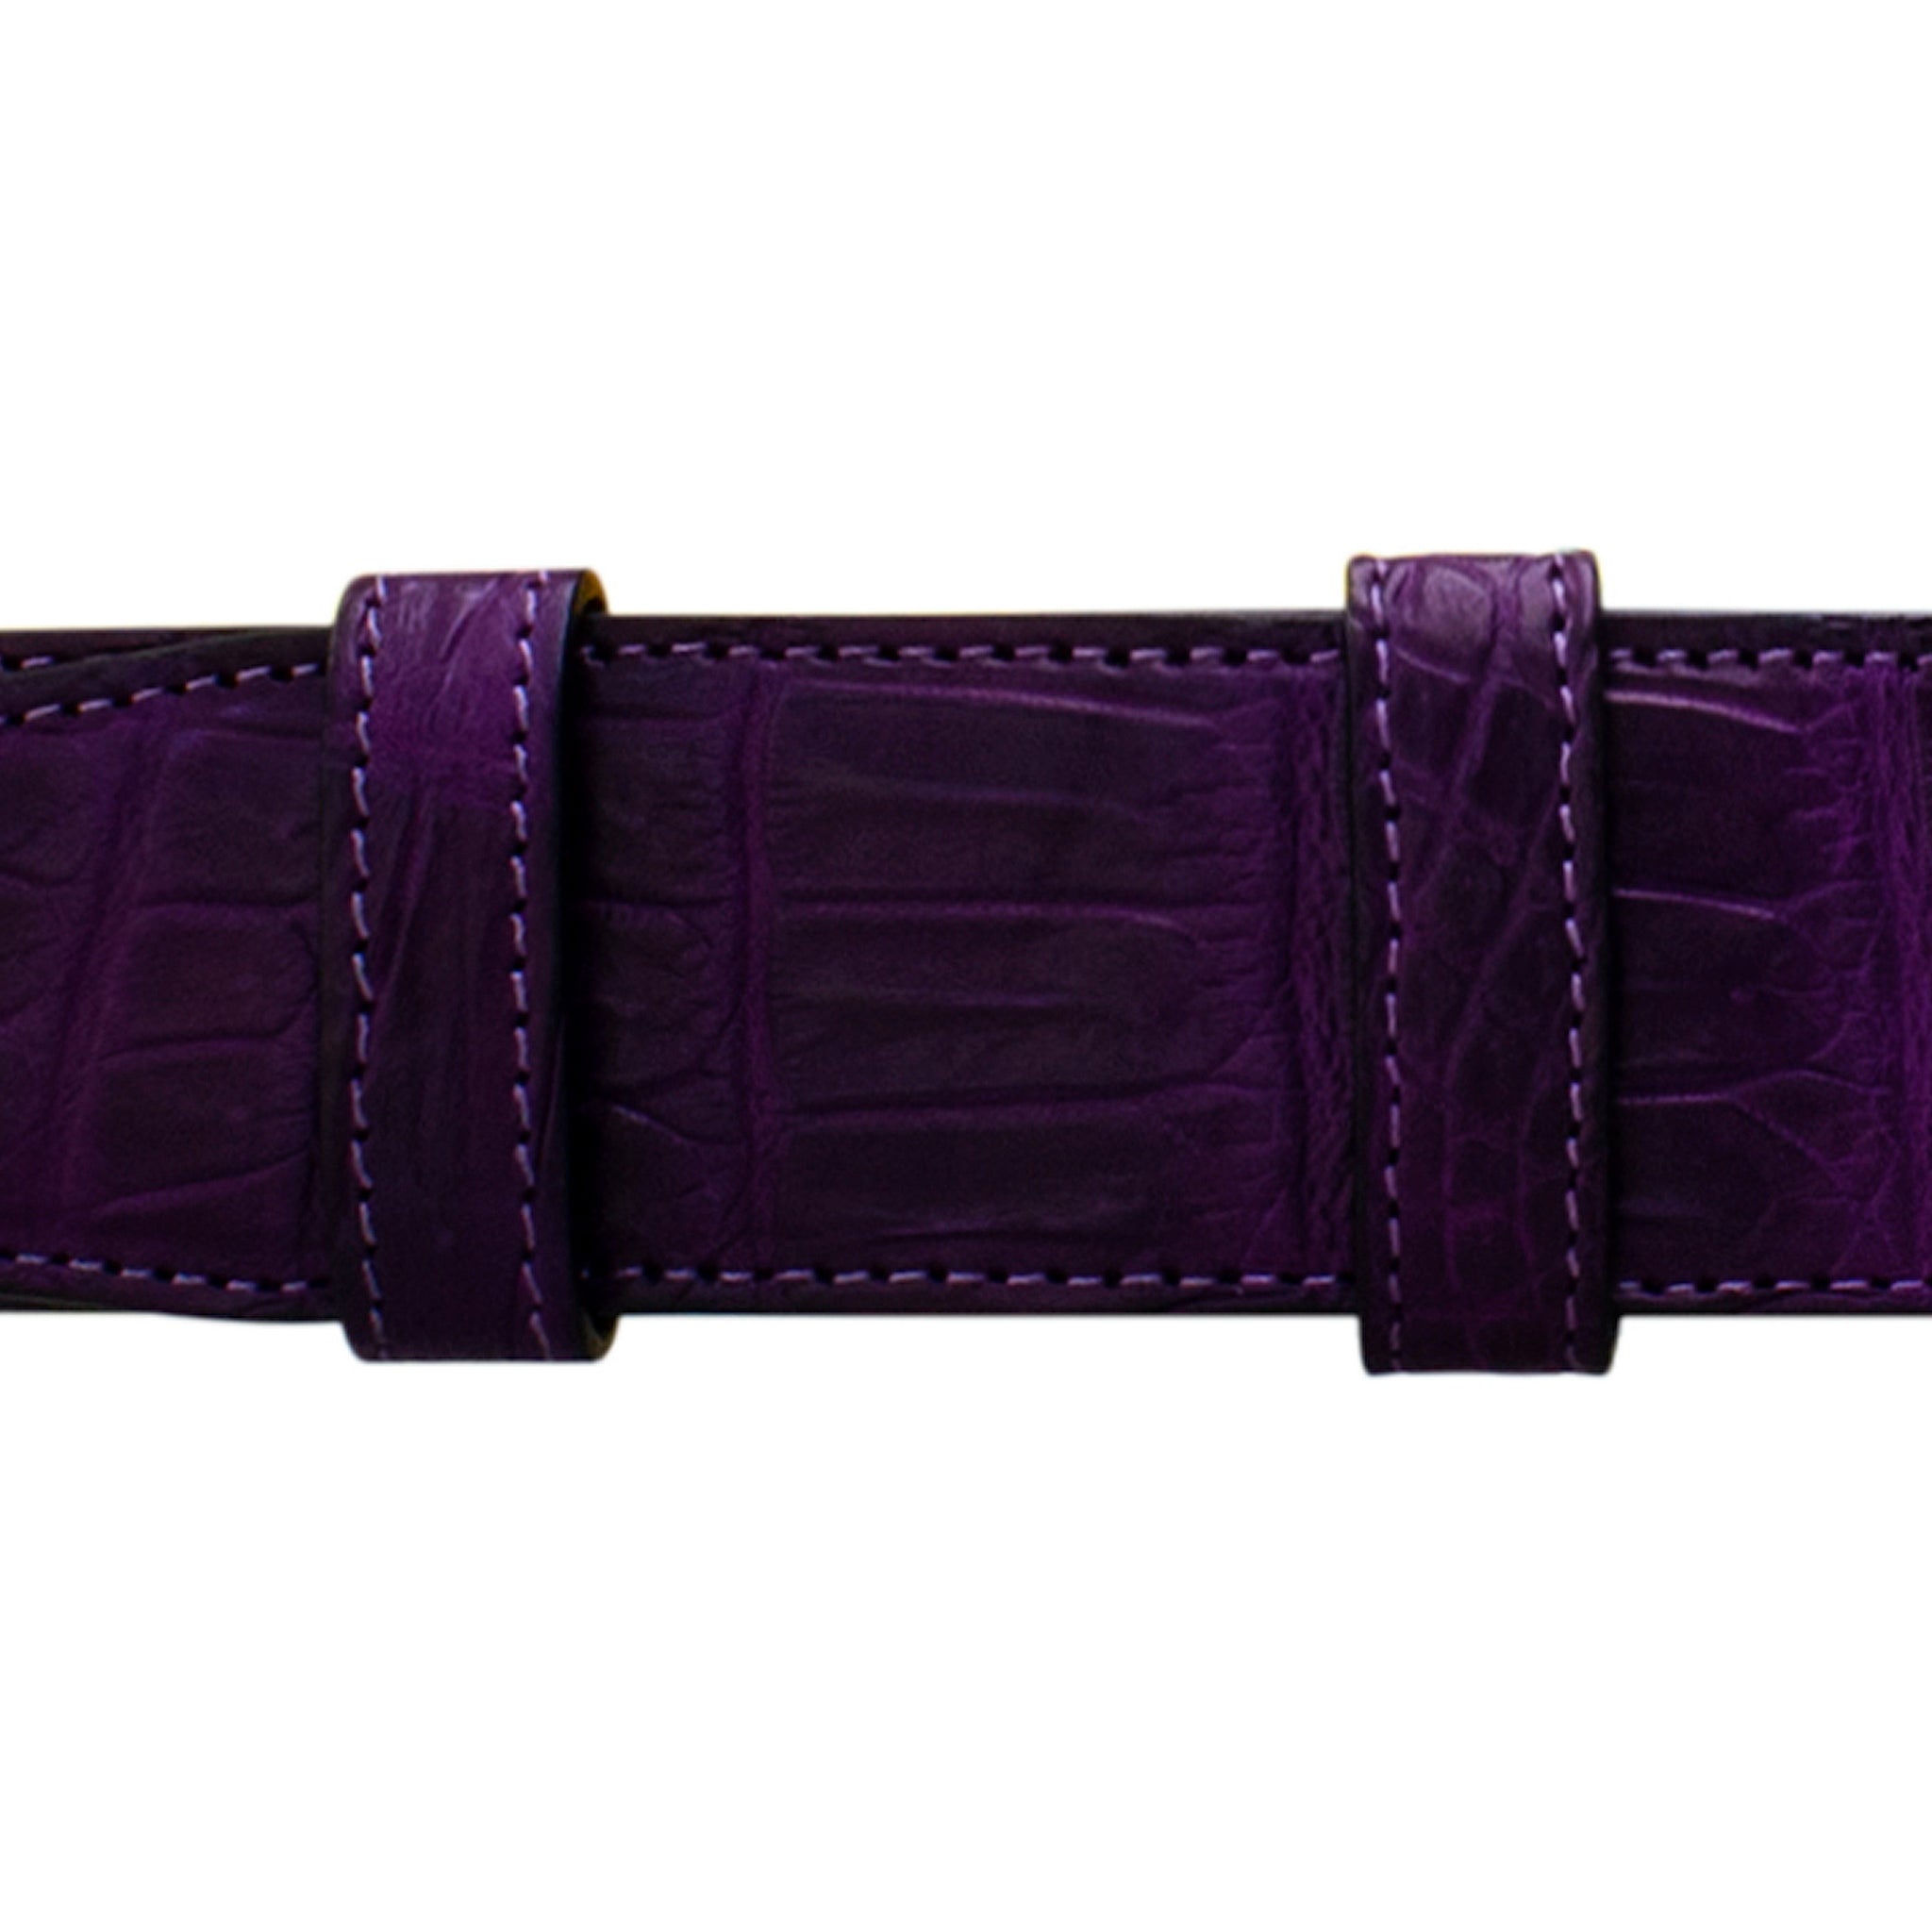 1 1/2" Violet Classic Belt with Austin Casual Buckle in Brass